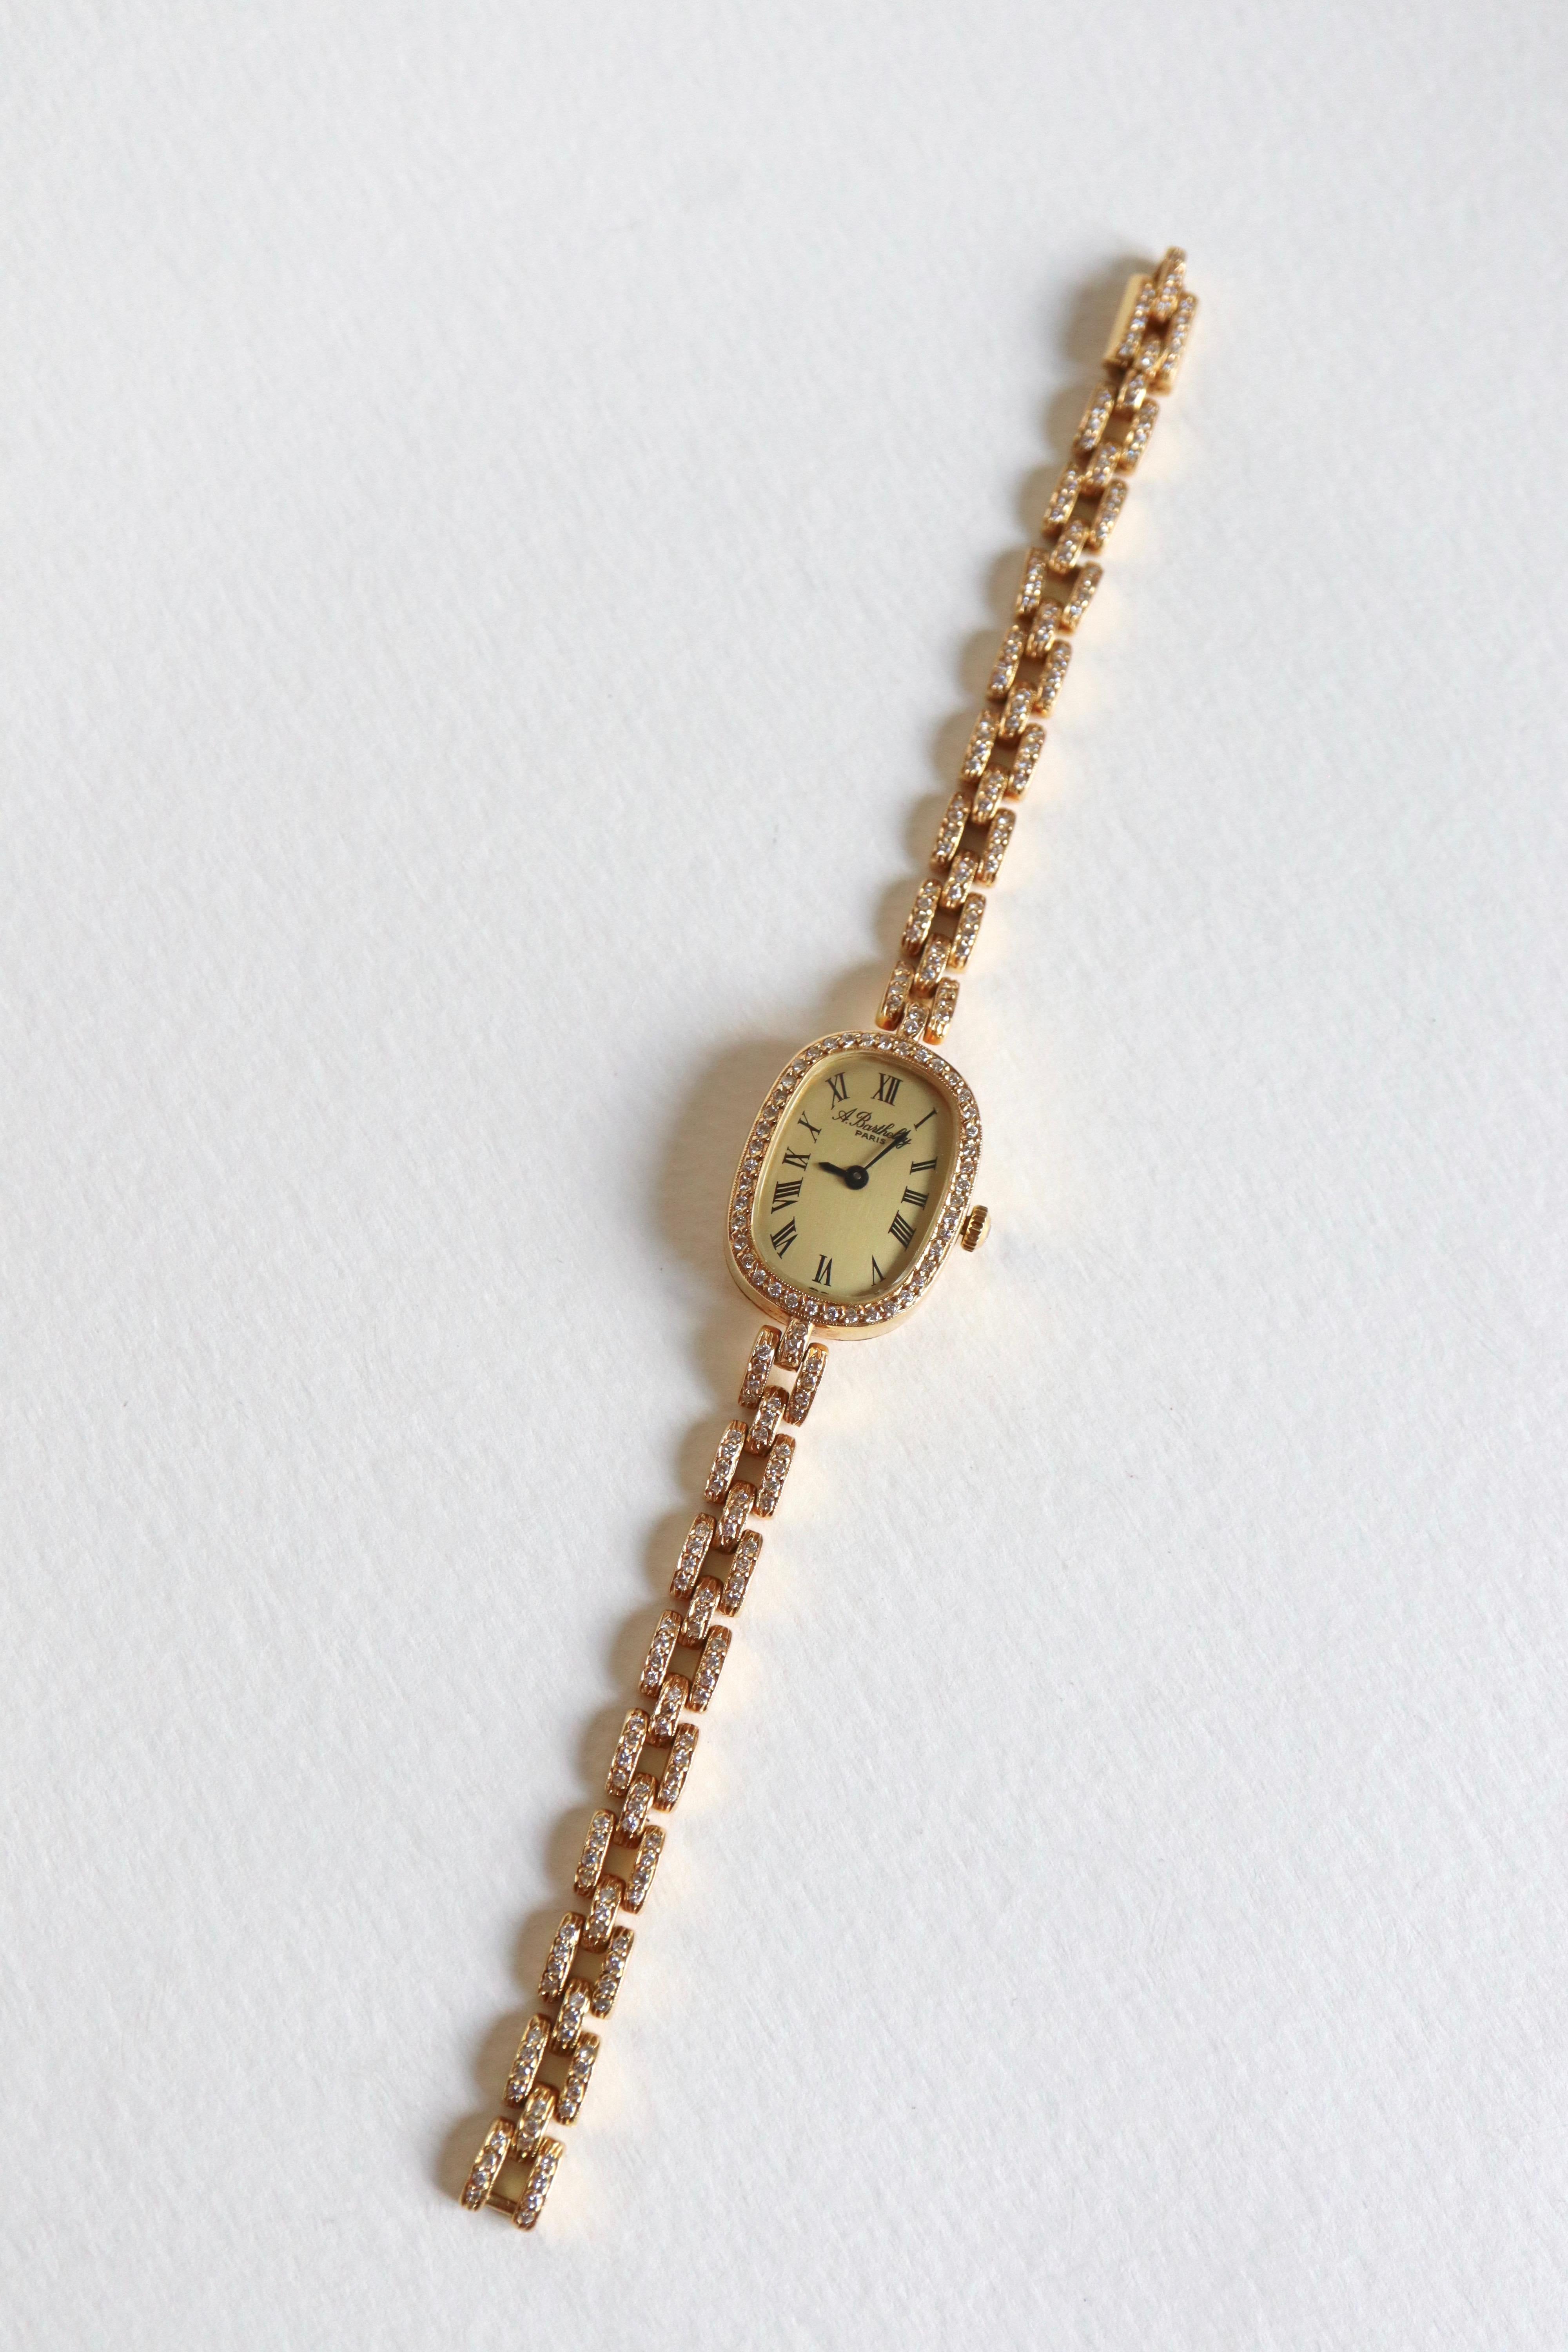 Brilliant Cut Alexis Barthelay Watch 18K Gold and Diamonds For Sale